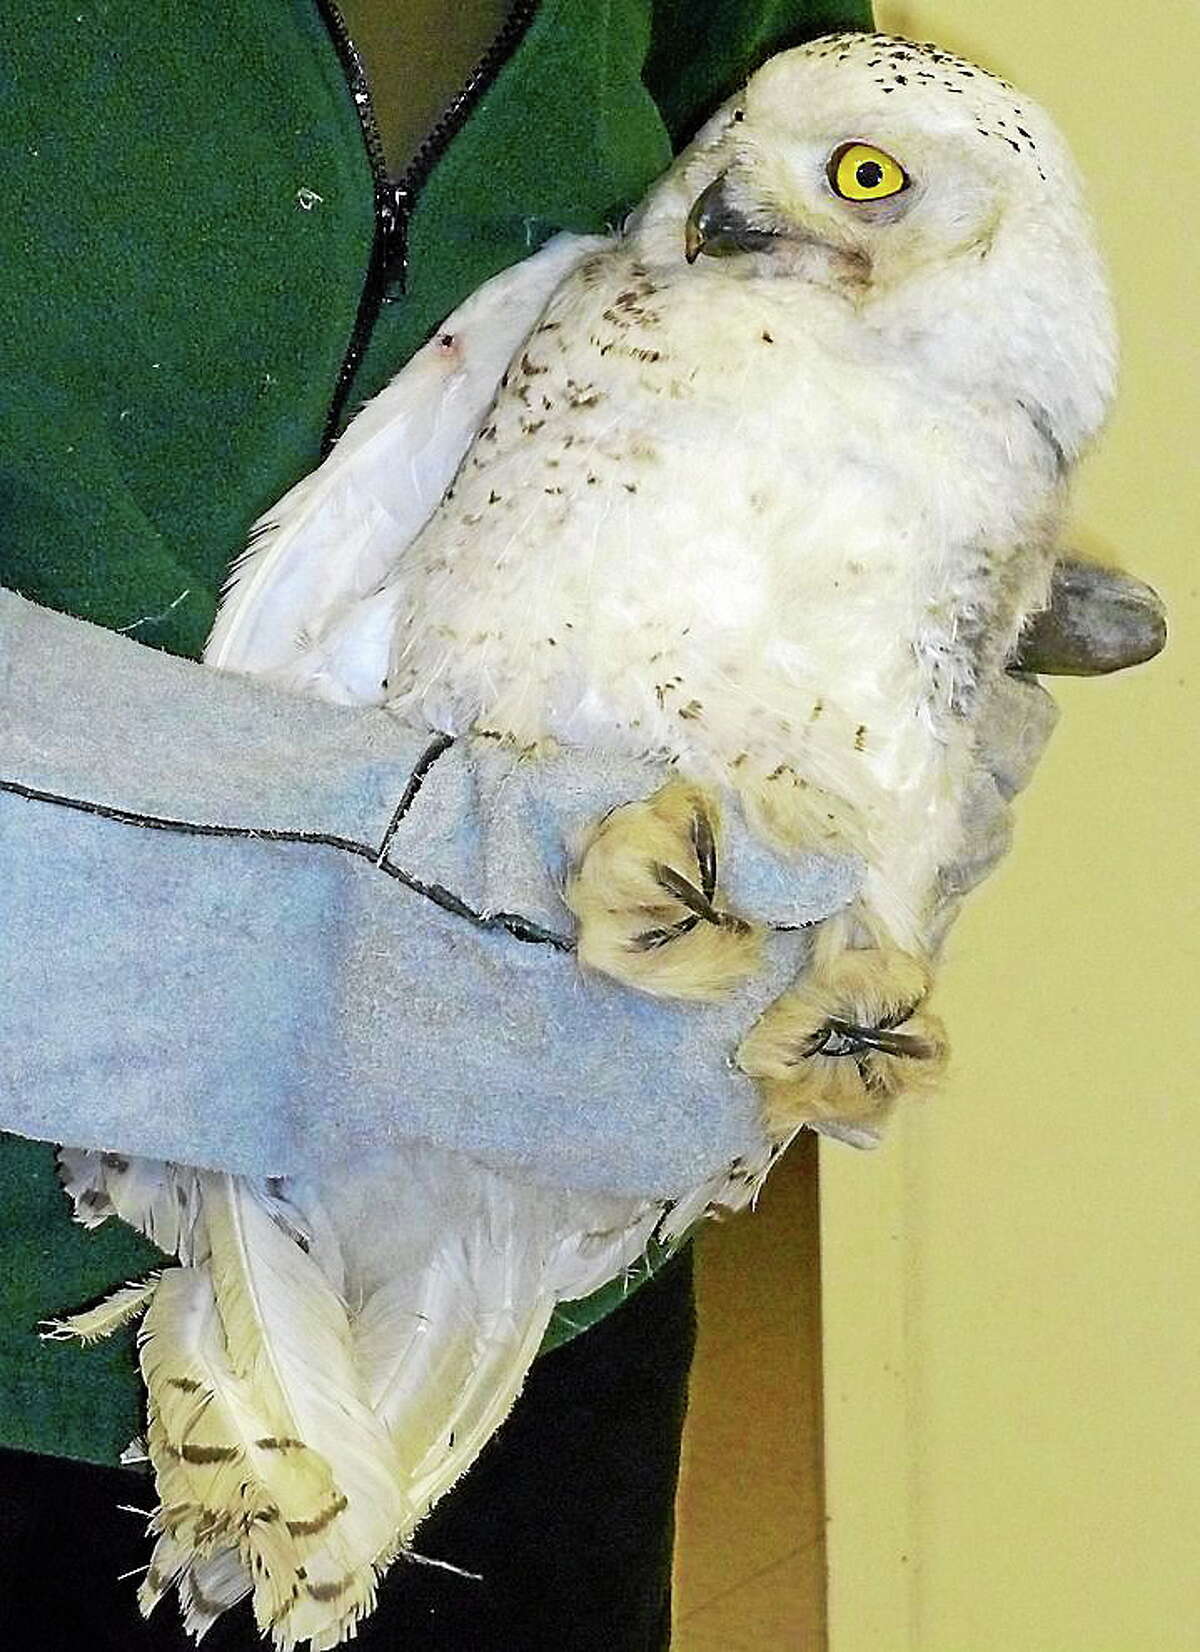 This snowy owl got his feathers fixed.